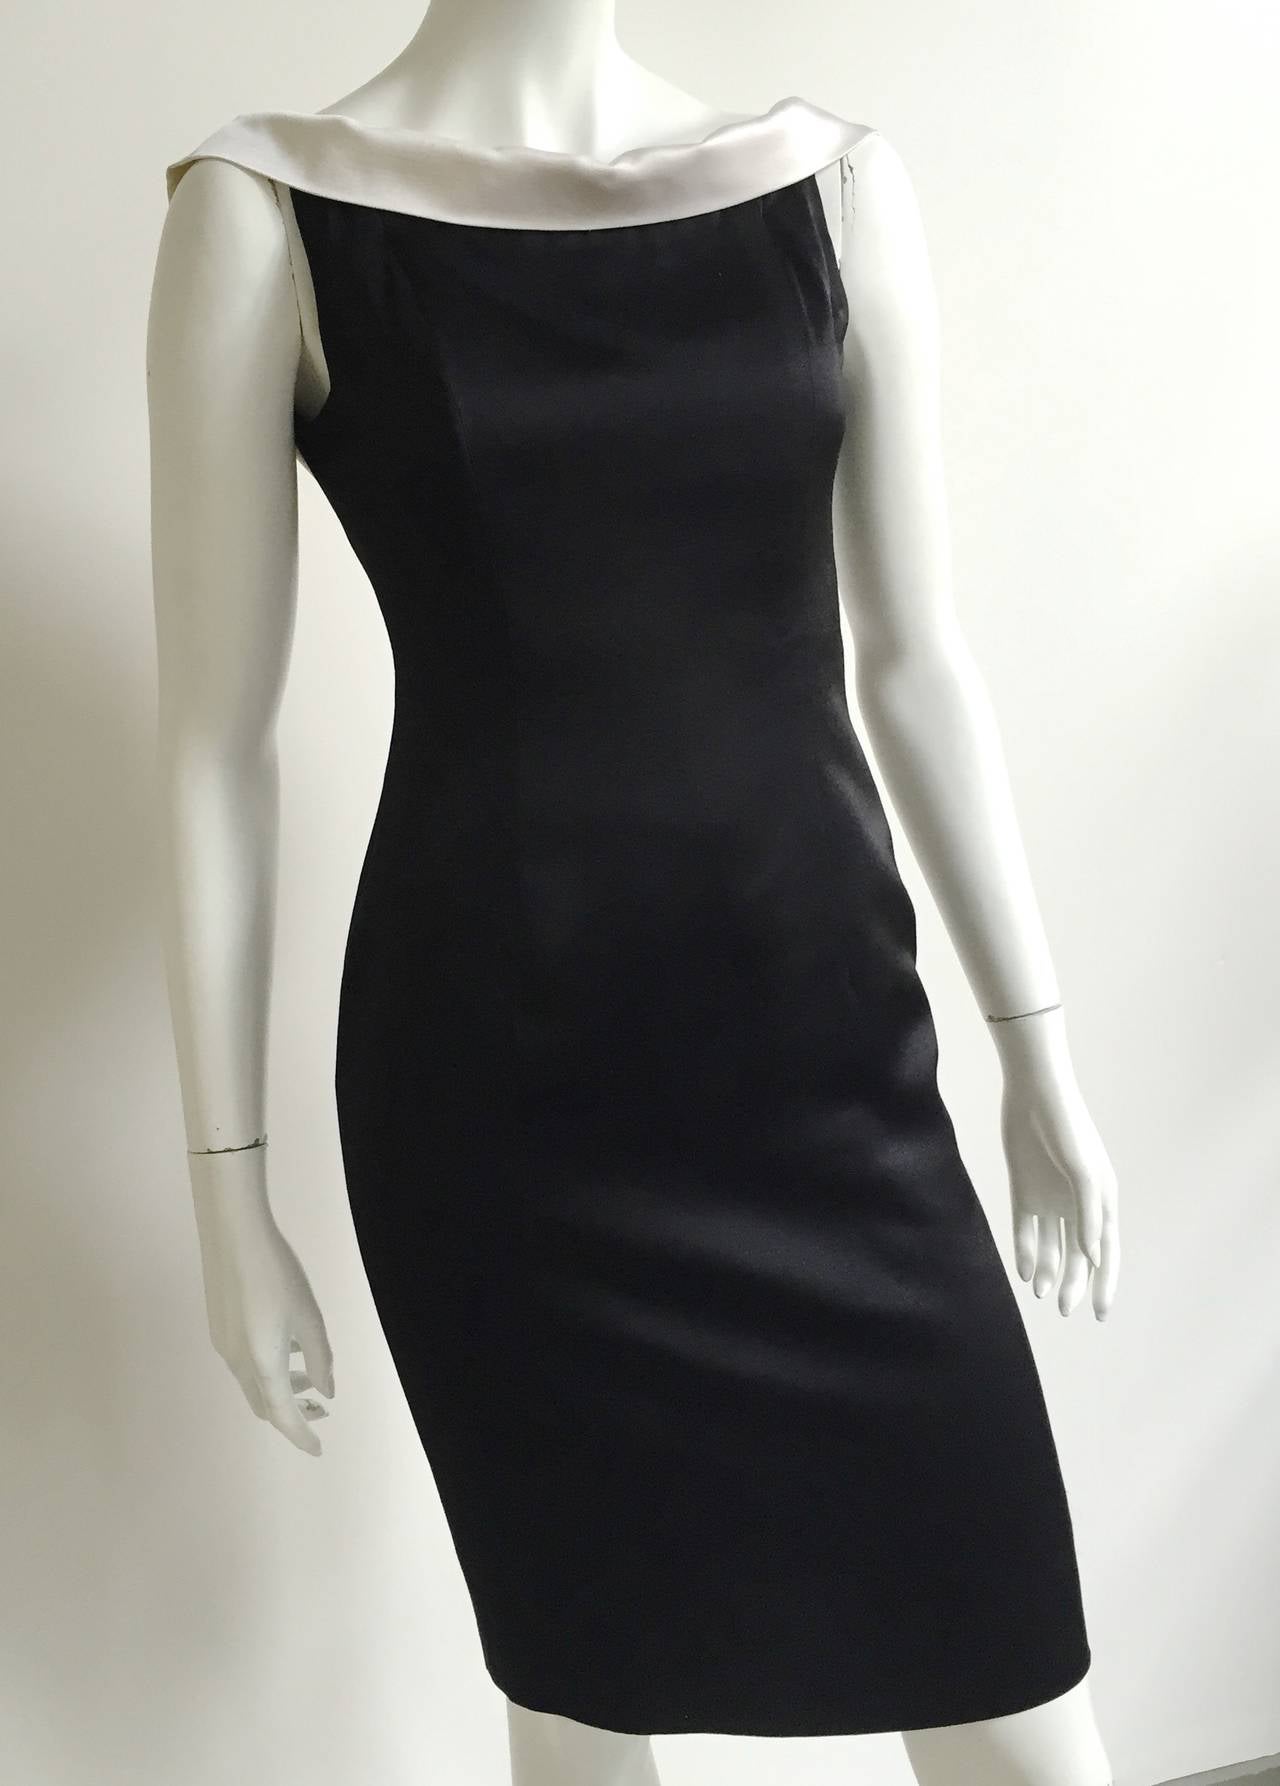 Patrick Kelly Paris 1980s sheath little black dress original size 6 but fits like a modern day 4 ( Please see & use measurements). Made in France. This Patrick Kelly stunning black dress with white collar will have all eyes on you when entering any